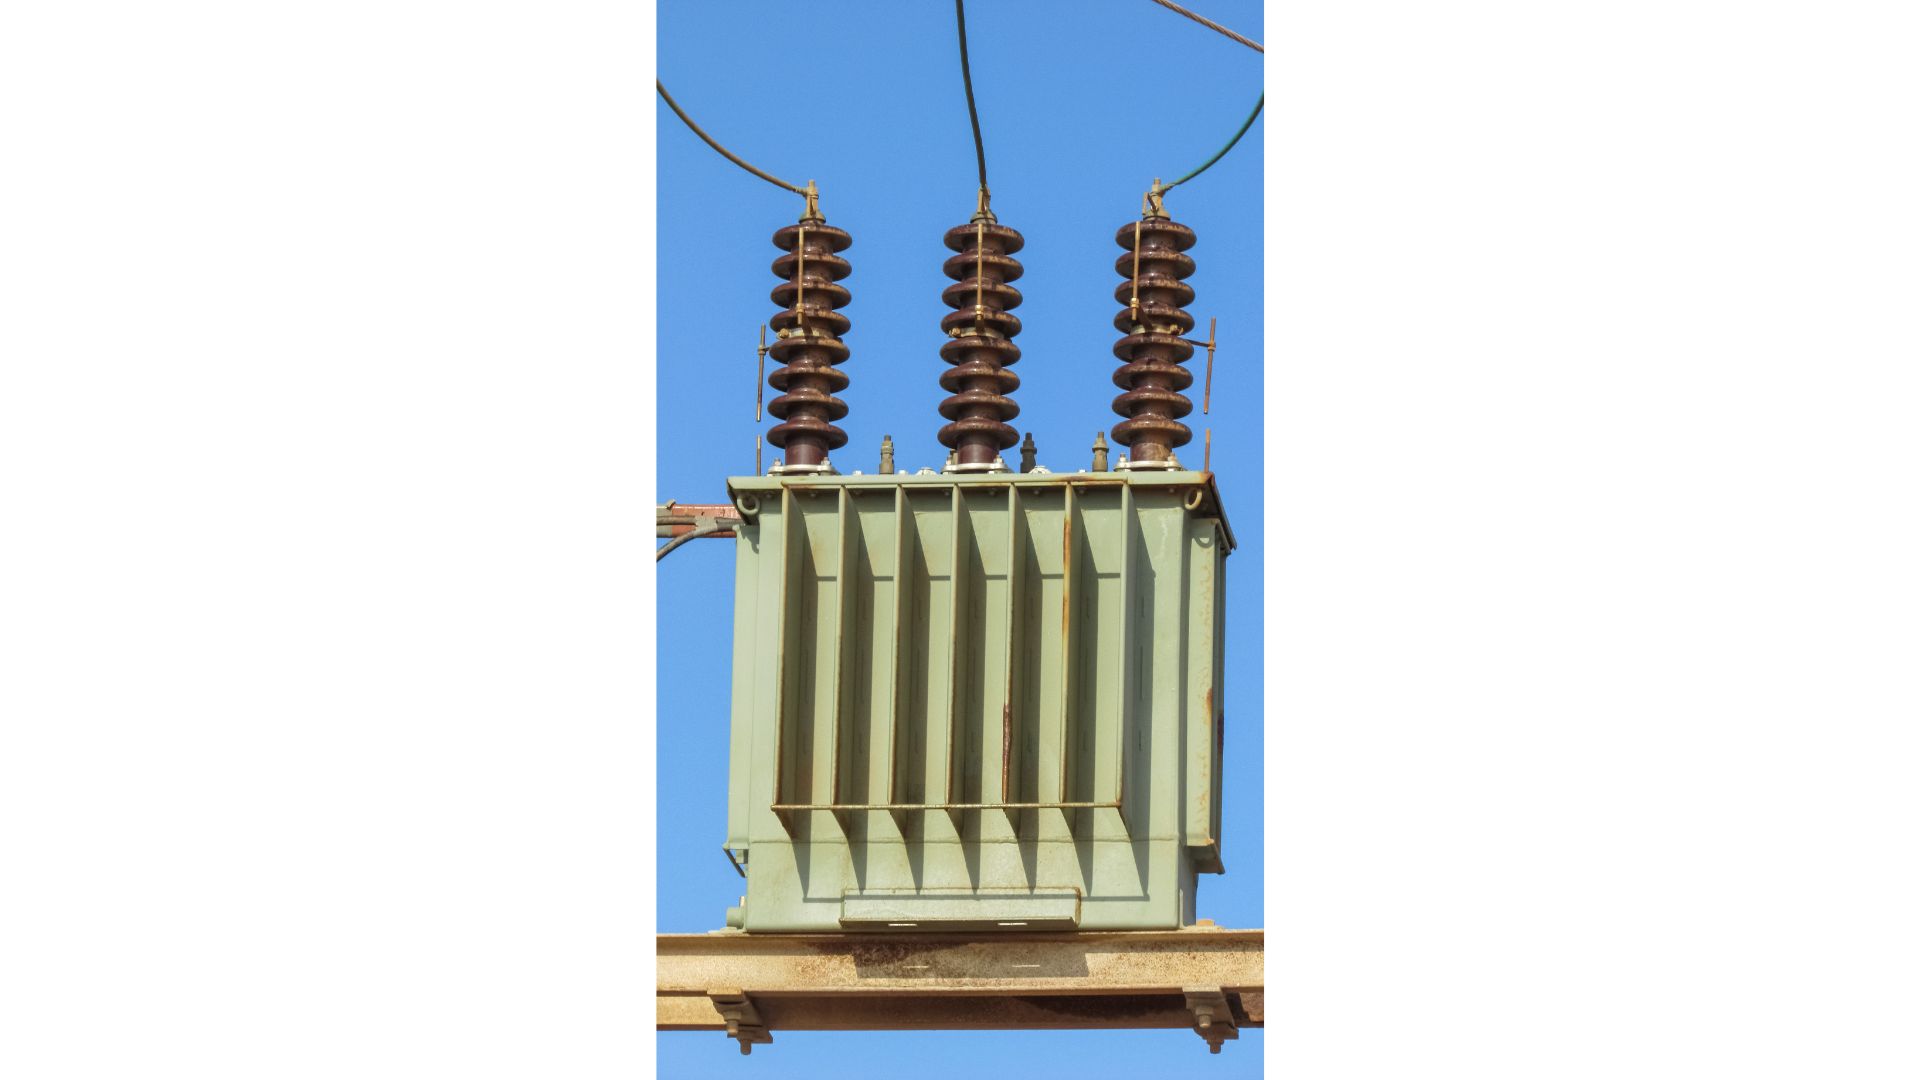 how long does it take to fix a transformer